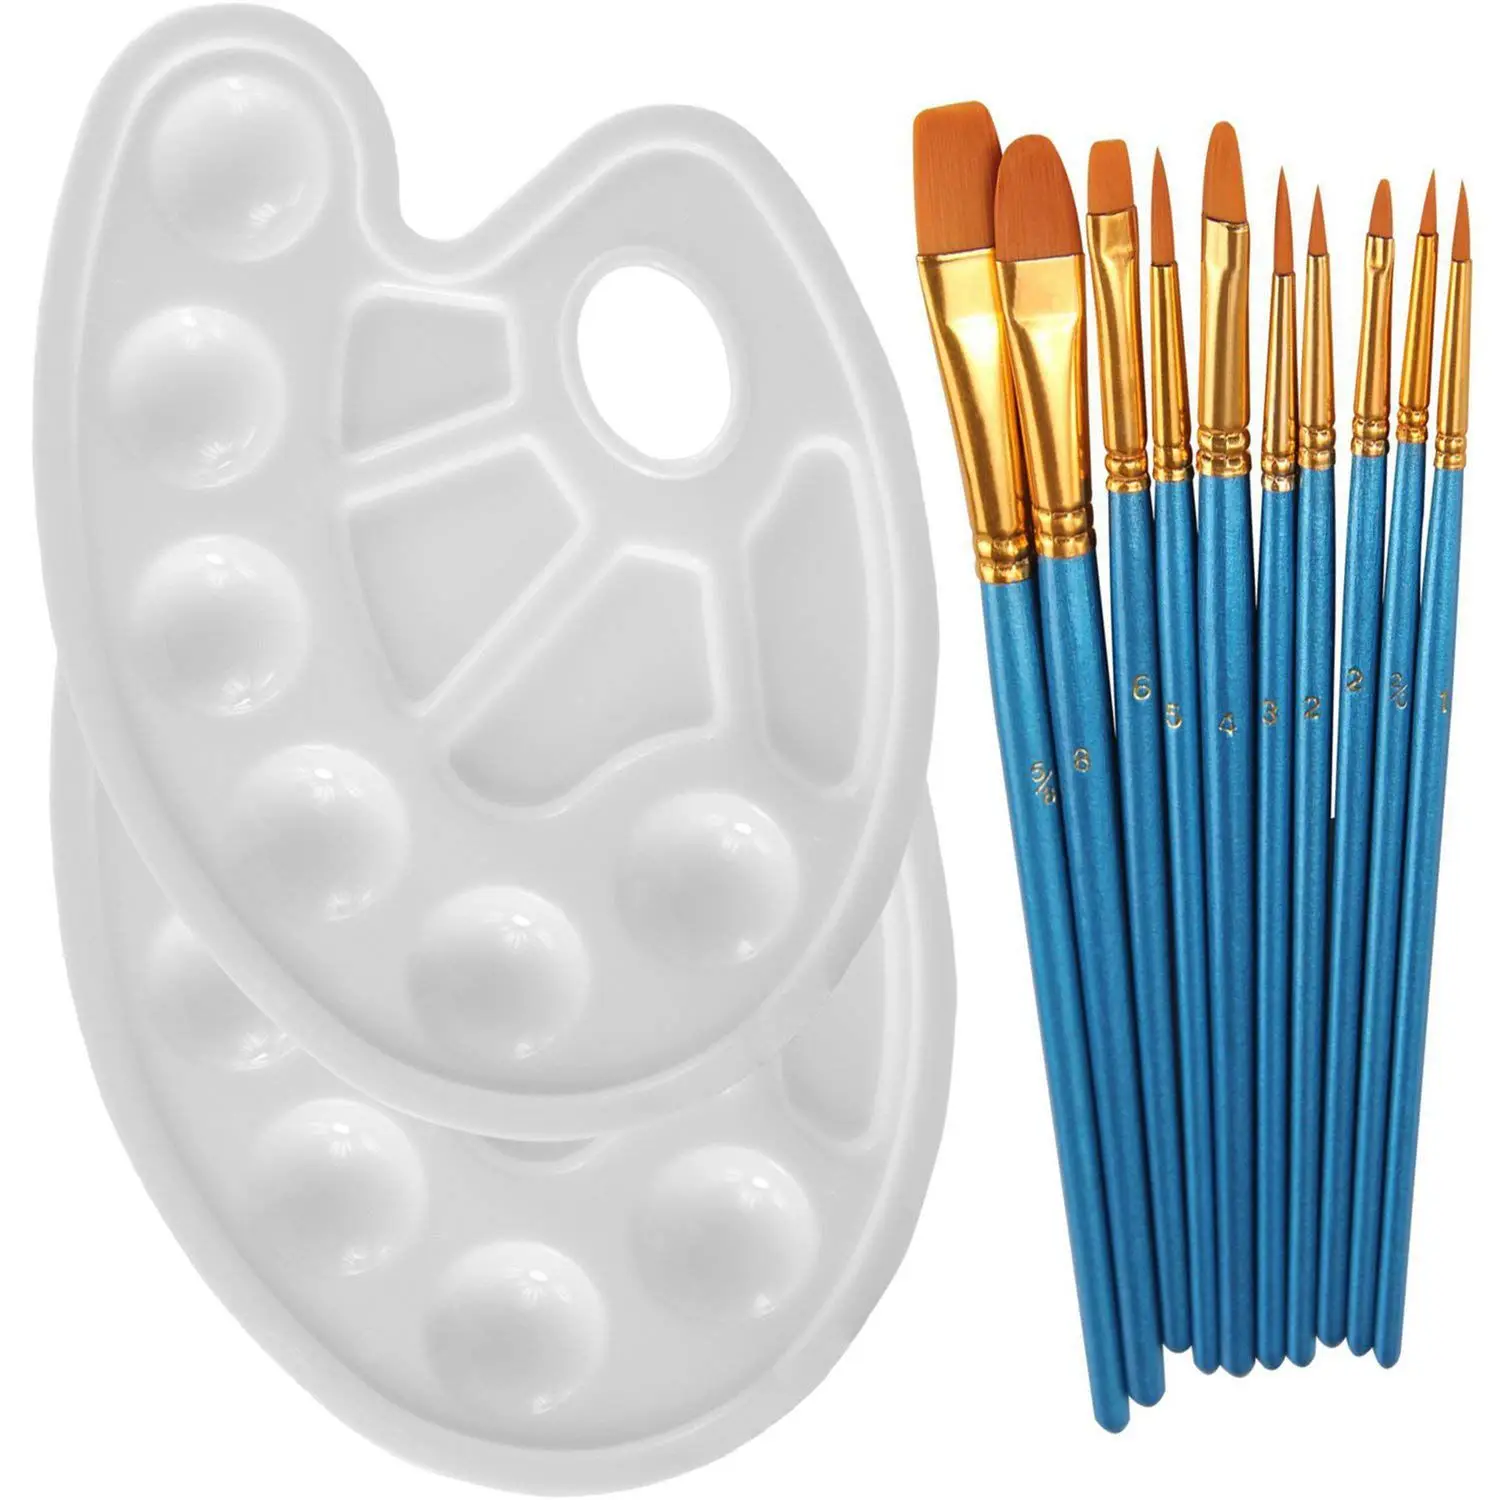 Heartybay 10Pieces Round Pointed Tip Nylon Hair Brush Set With 2 Piece Paint Tray Palette 